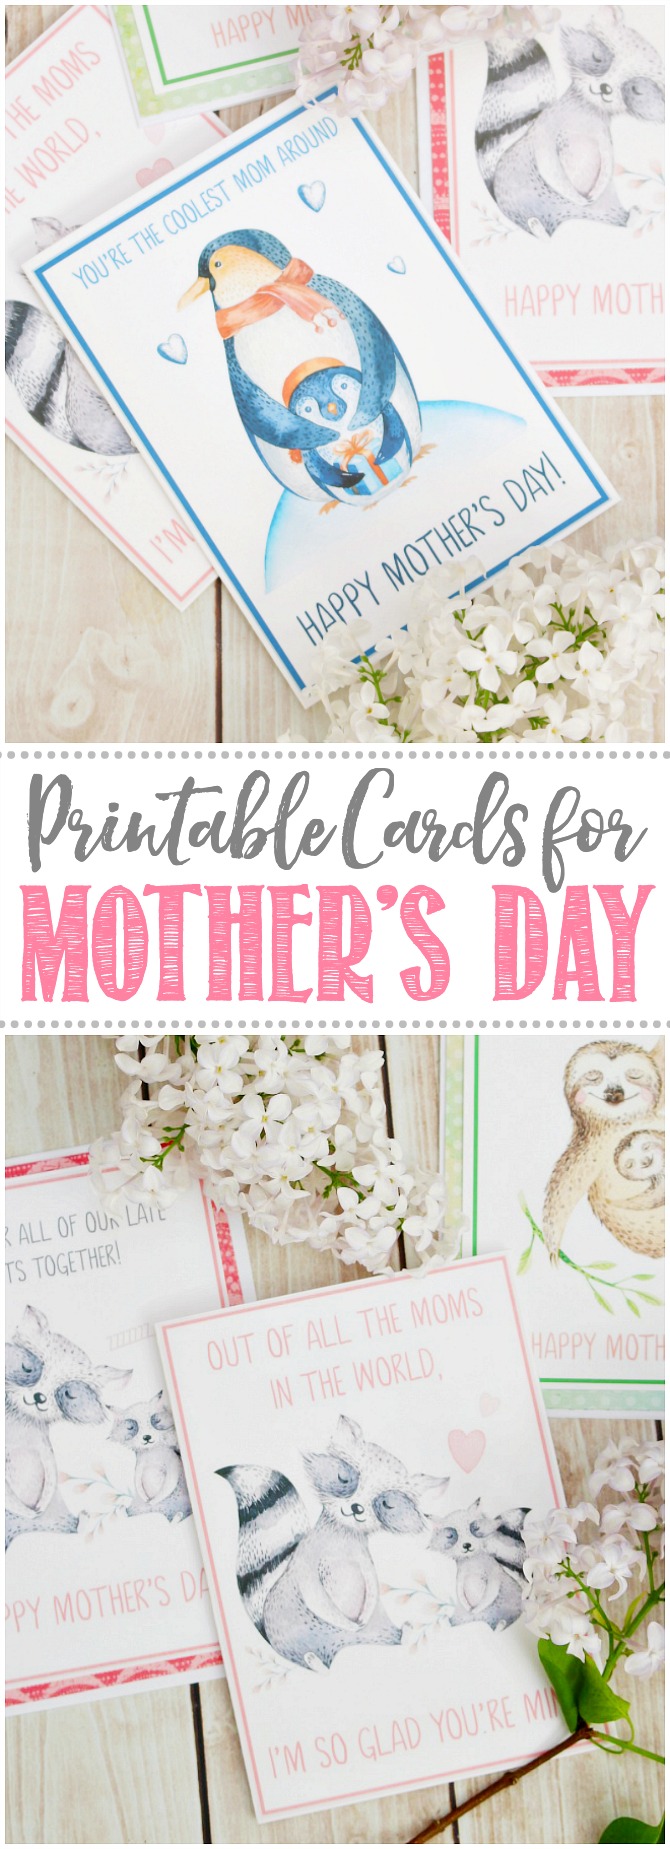 Mother's Day Card Template Free from www.cleanandscentsible.com